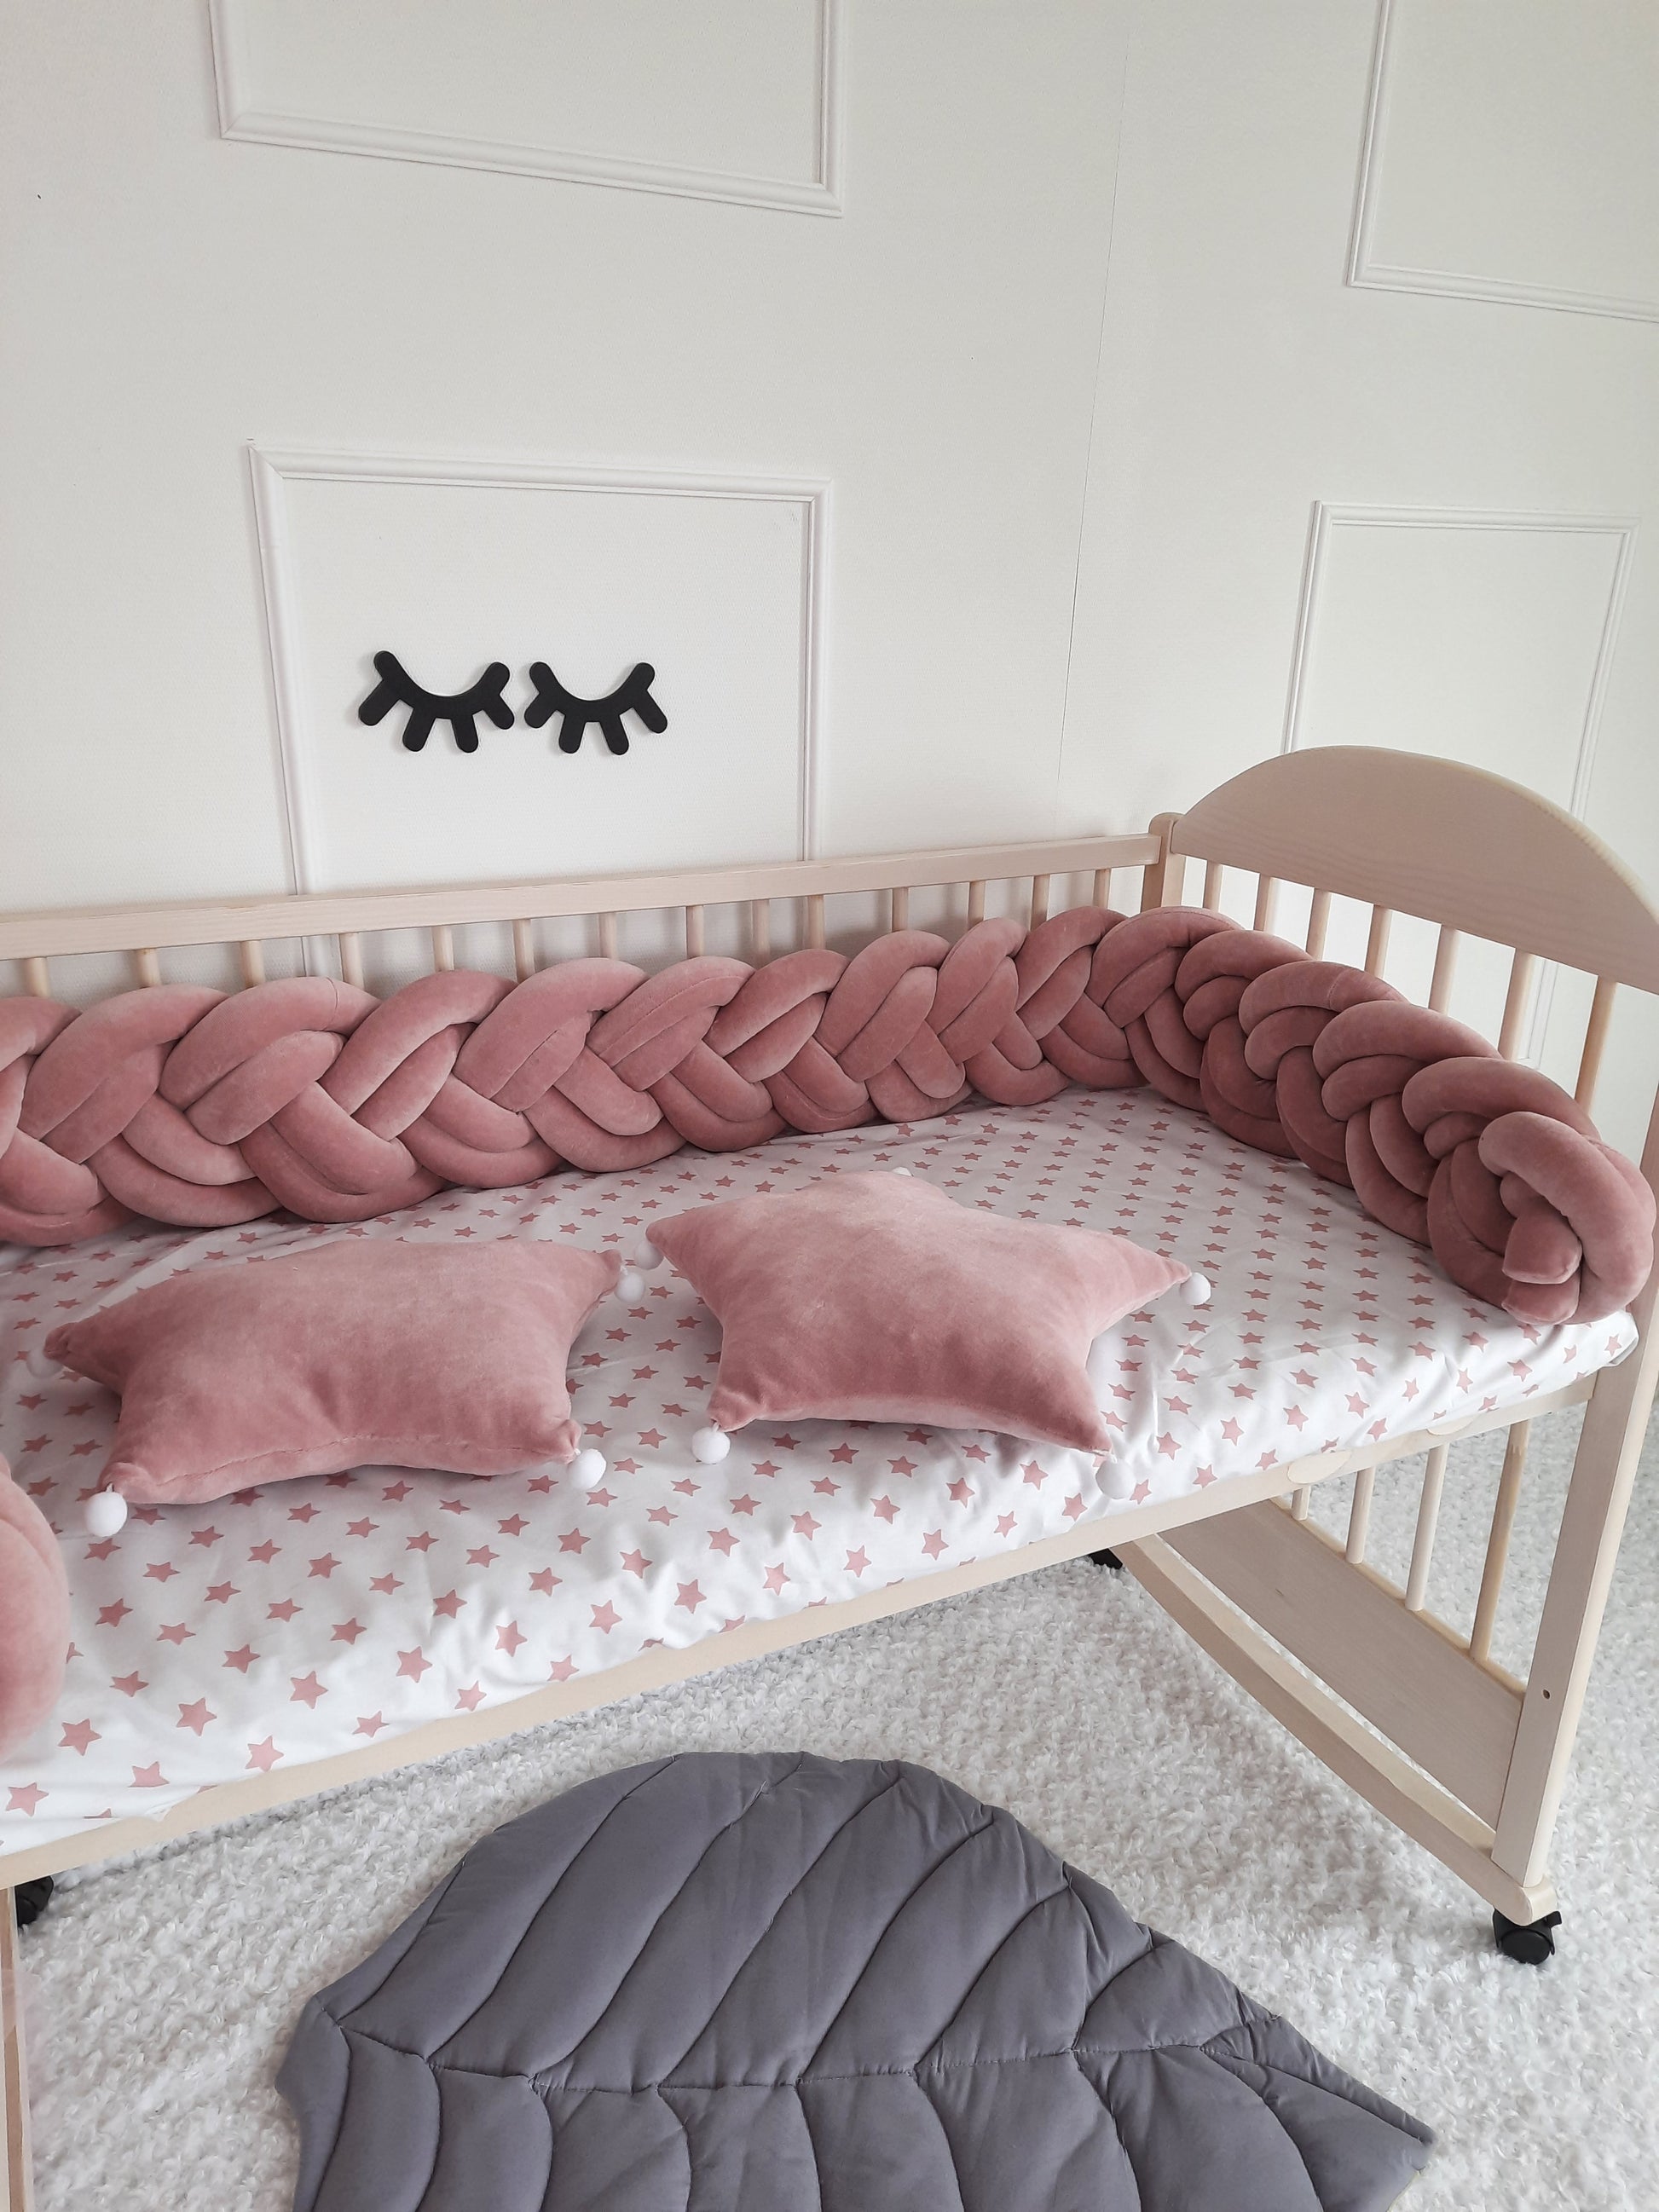 Fresia braided bumper with two star pillows on the crib